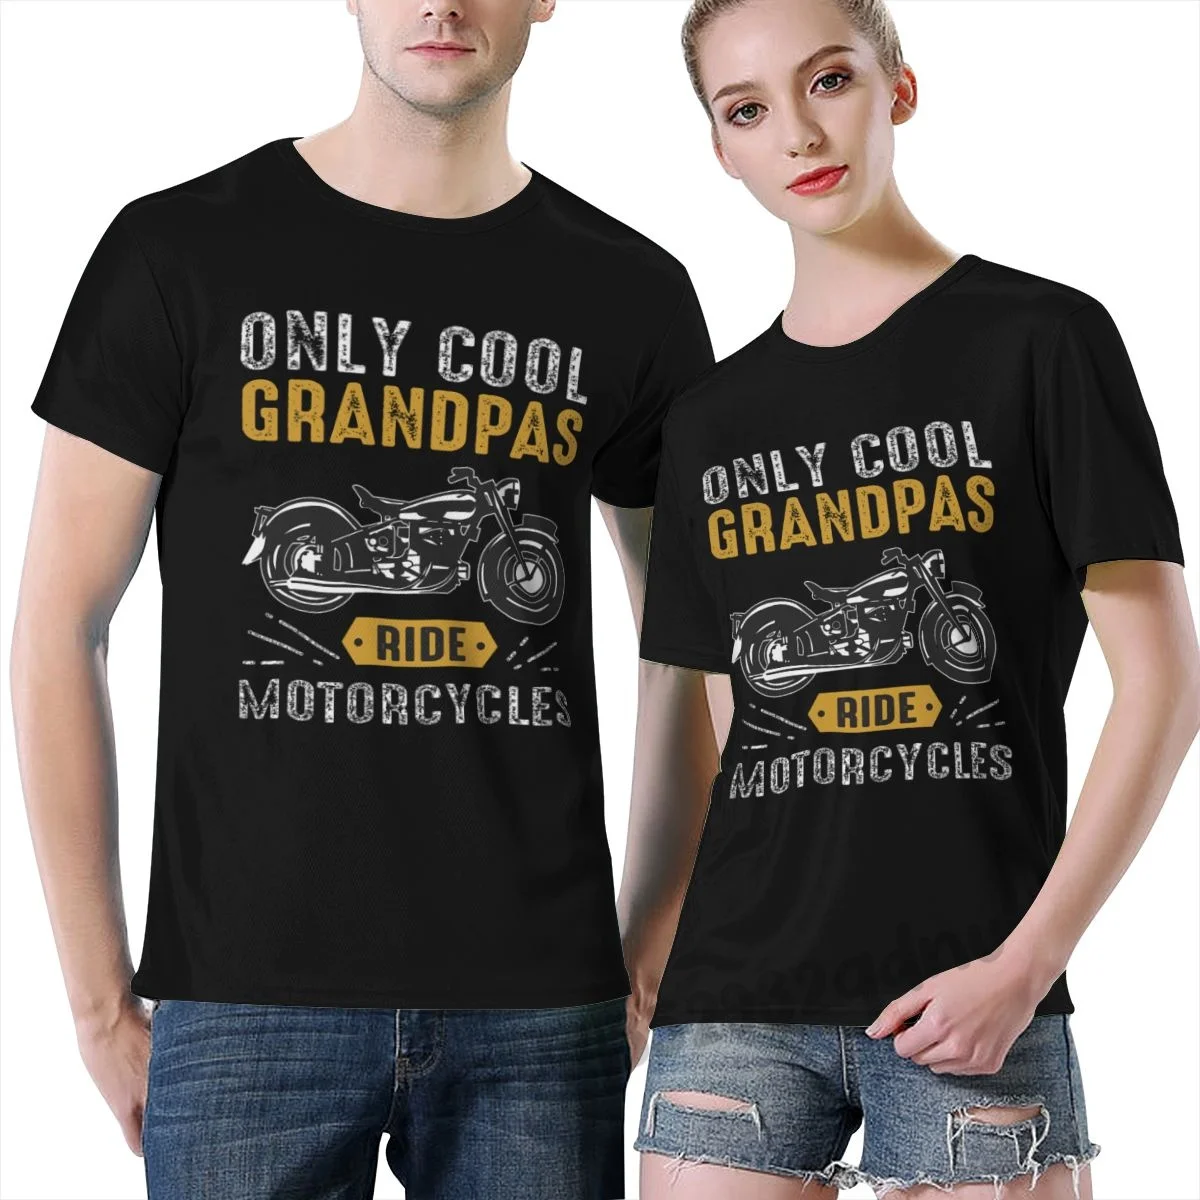 

New Men 2022 Brand Clothing Tees Casual UNISEX T-SHIRT Only Cool Grandpas Ride Motorcycles Pixel T-Shirt